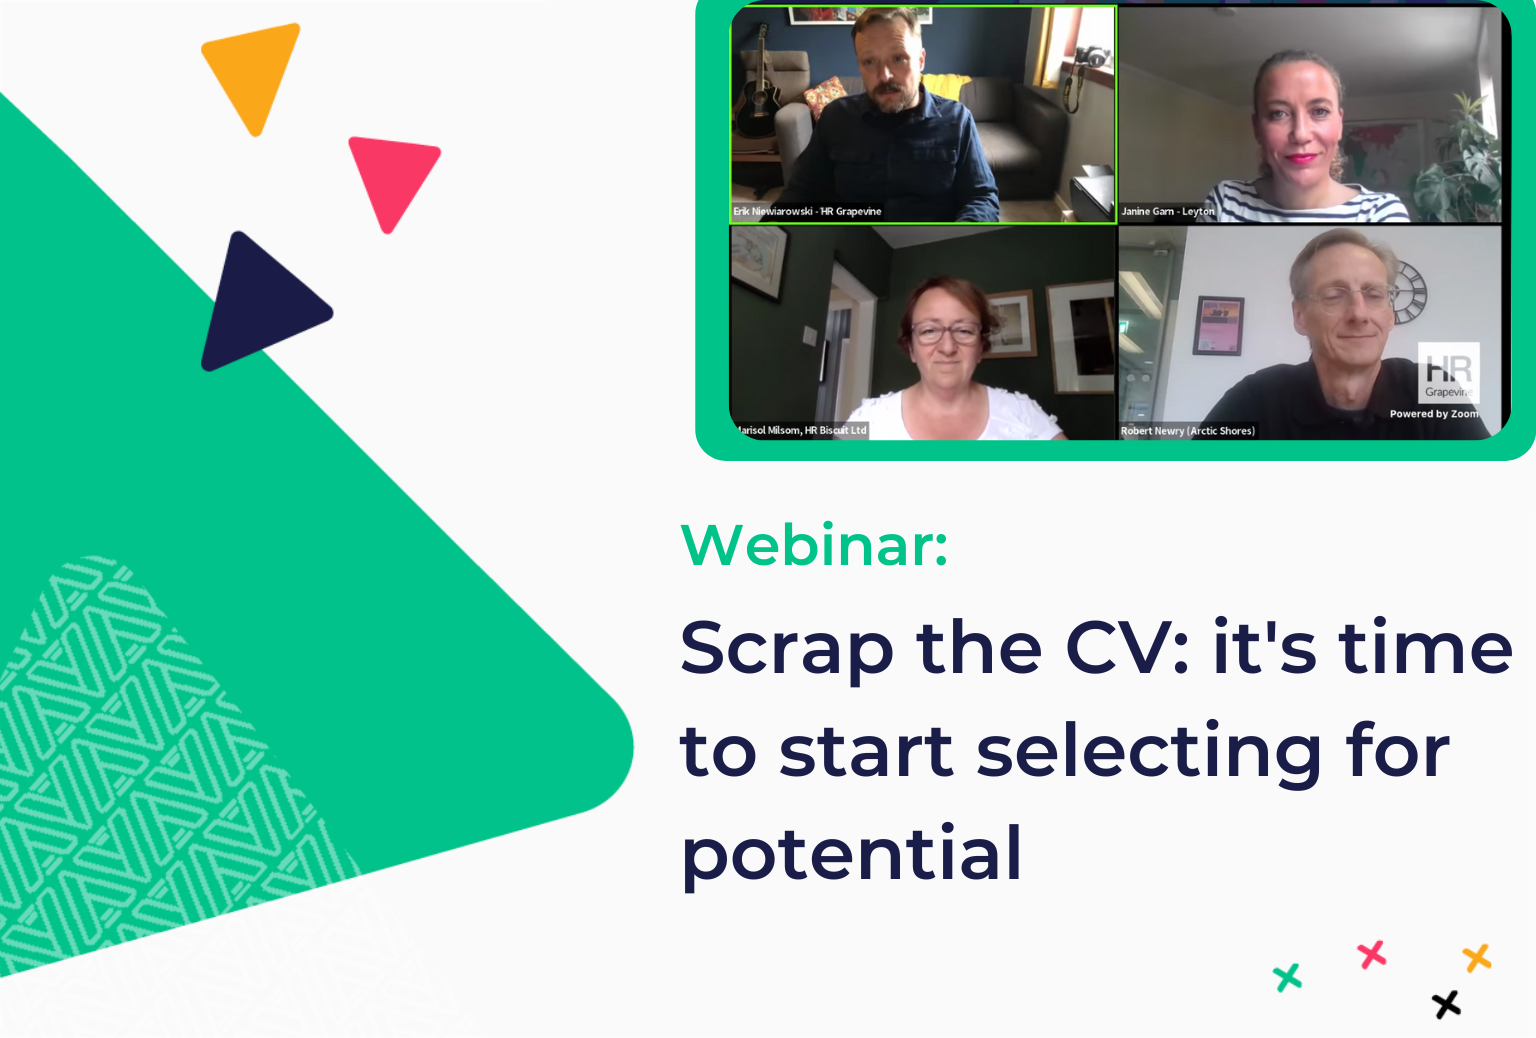 Webinar: Scrap the CV: it's time to start selecting for potential